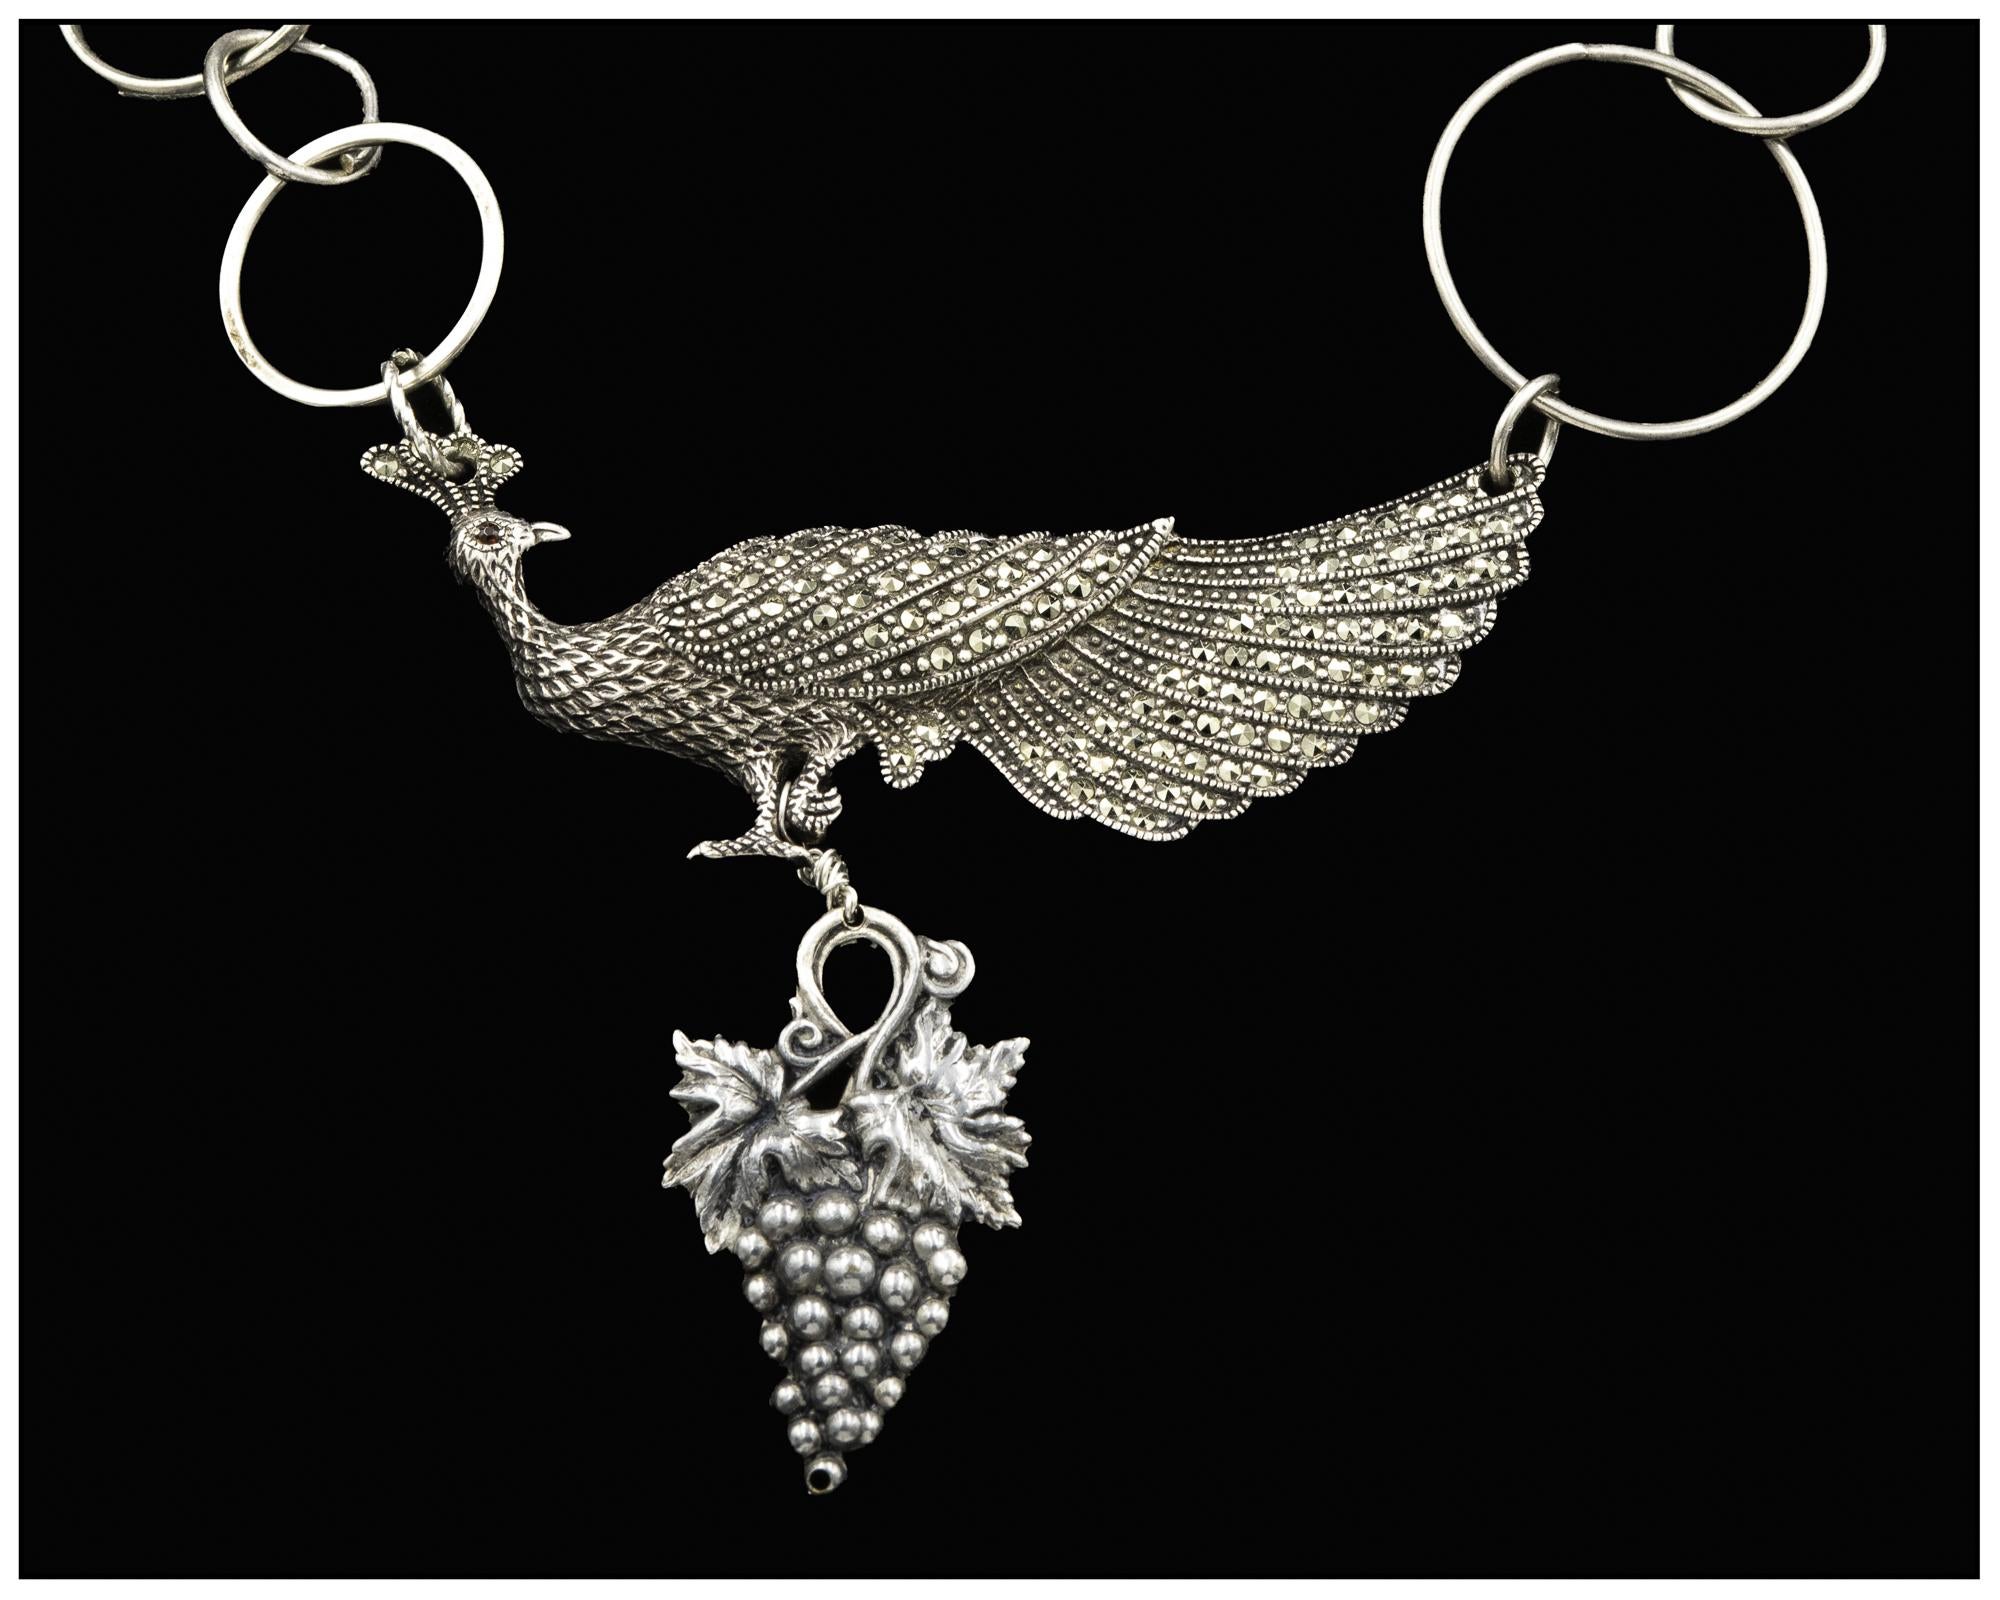 Sterling silver and marcasite vintage peacock brooch pendant with sterling silver rings and beads is on offer from Lorraine’s Bijoux.This mid century handmade brooch has lovely sinuous lines and is totally encrusted with hand set marcasite.The